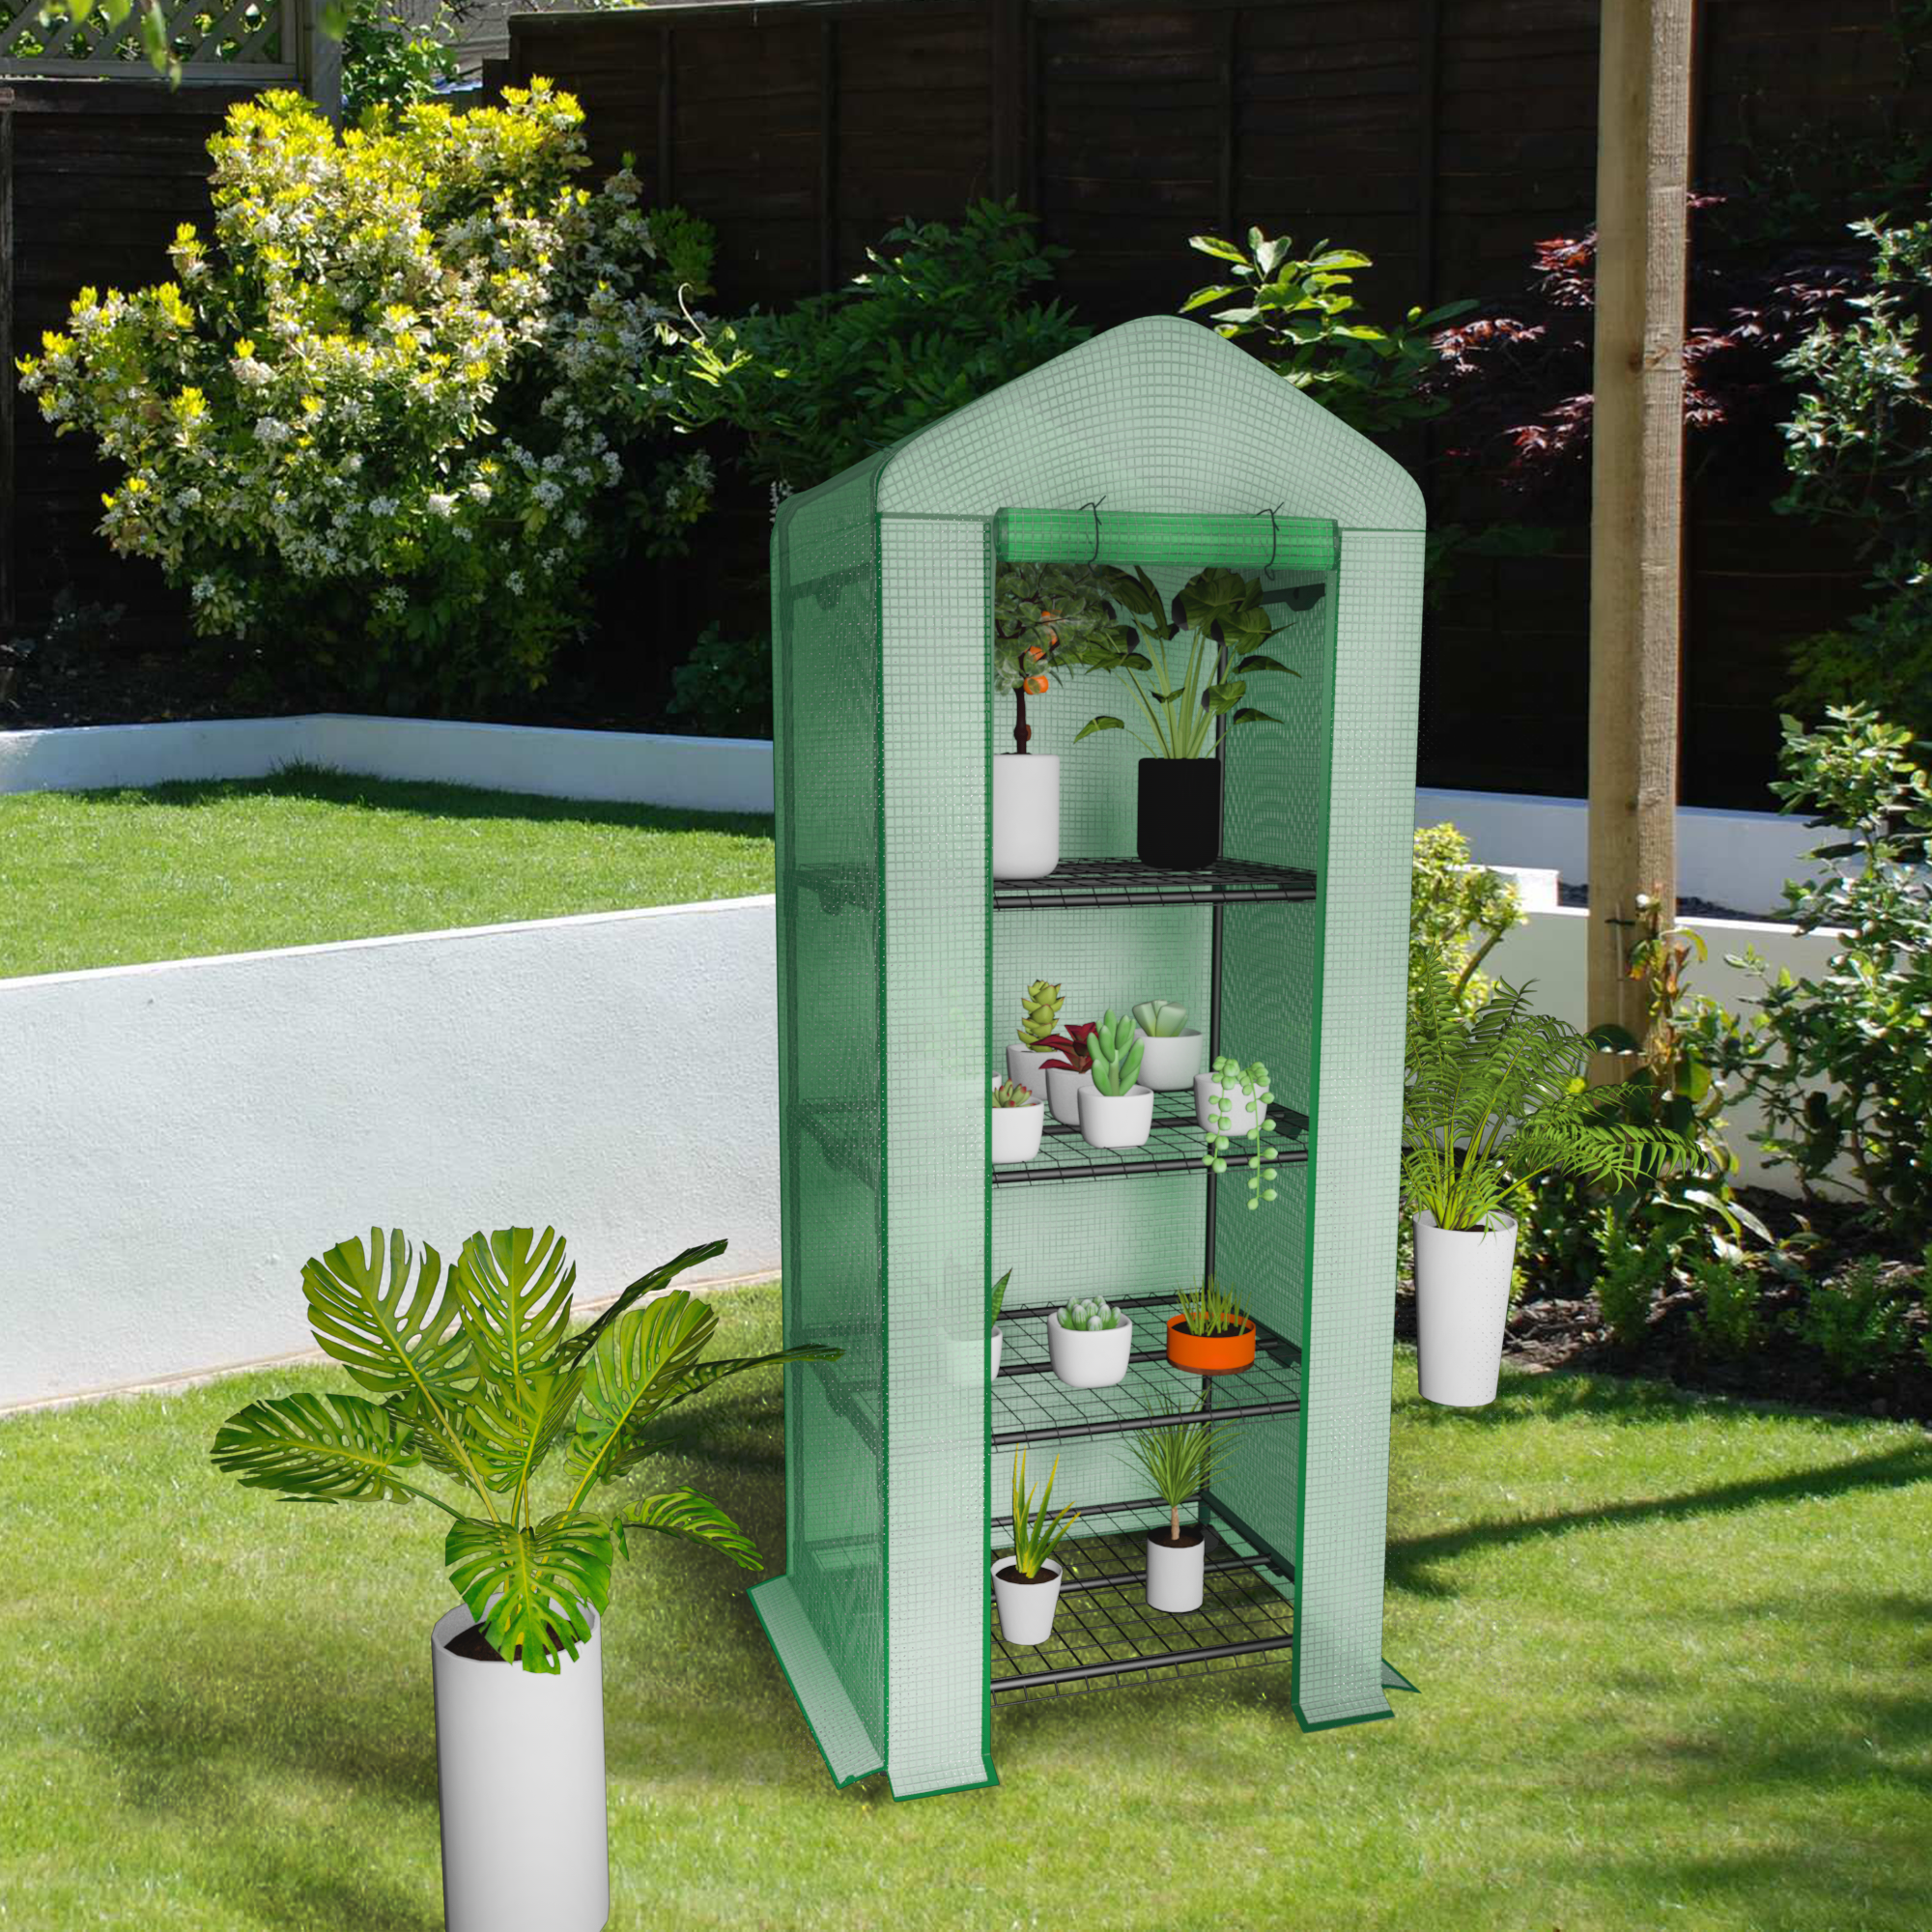 4-Tier Mini Greenhouse on Casters, Outdoor and Indoor Gardening Plant Greenhouse, Sturdy Gardening Shelves with PVC Cover and Rolling Zipper Door, Green, 27''Lx19.3''Wx62.2''H